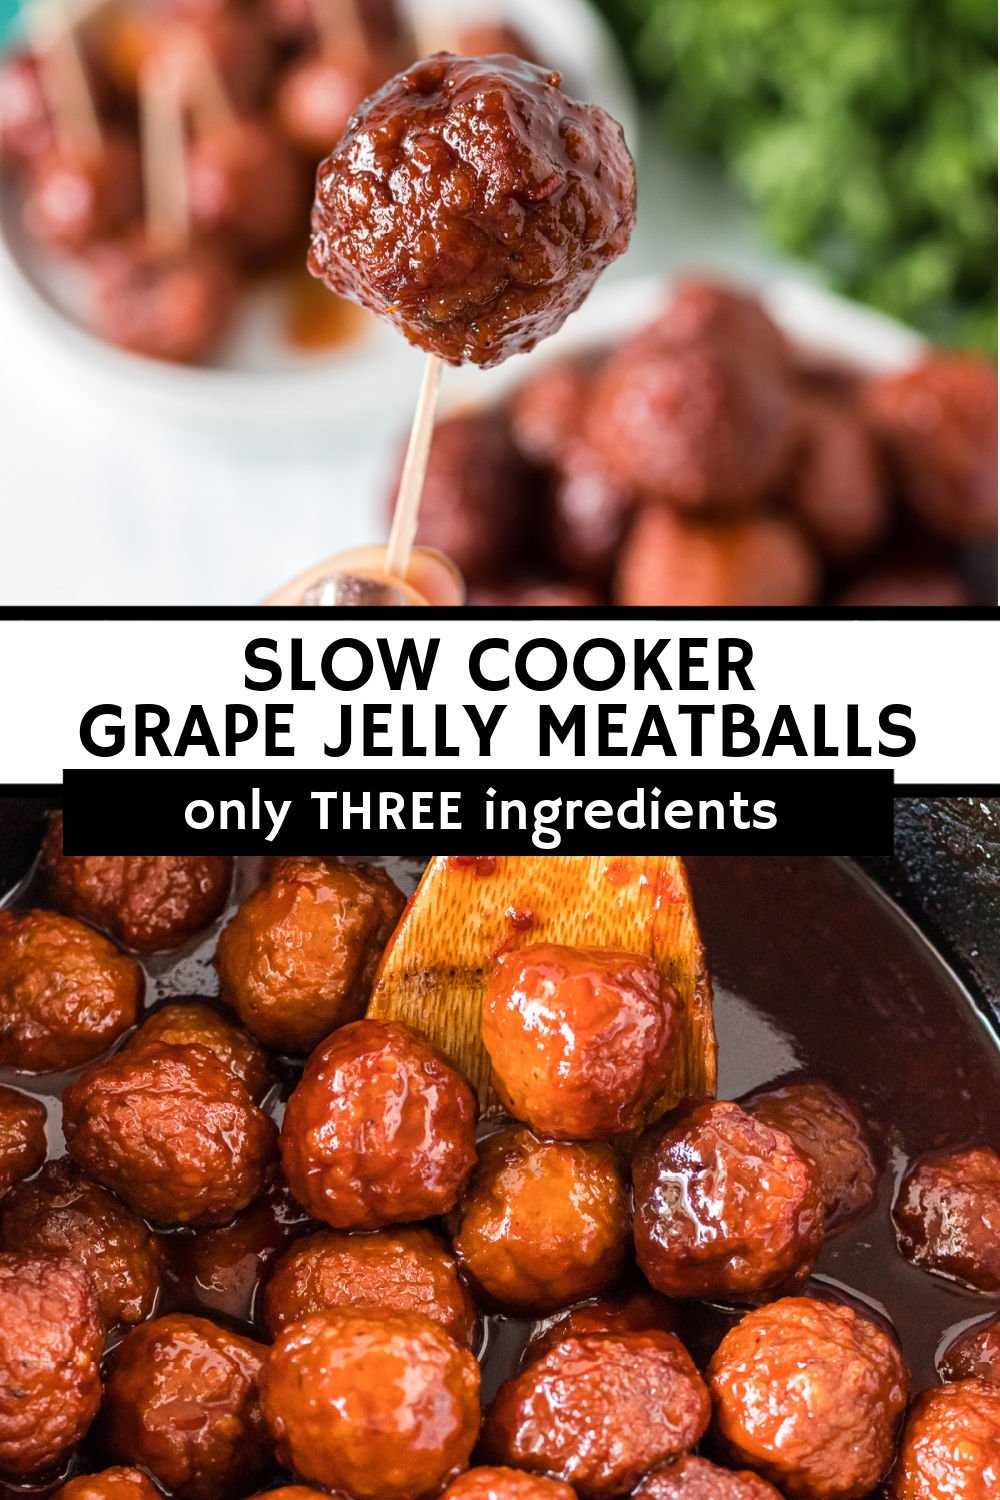 Tender meatballs slow cooked in a simple grape jelly and chili sauce. These meatballs make for the perfect simple savory party appetizer or easy dinner idea! | www.persnicketyplates.com